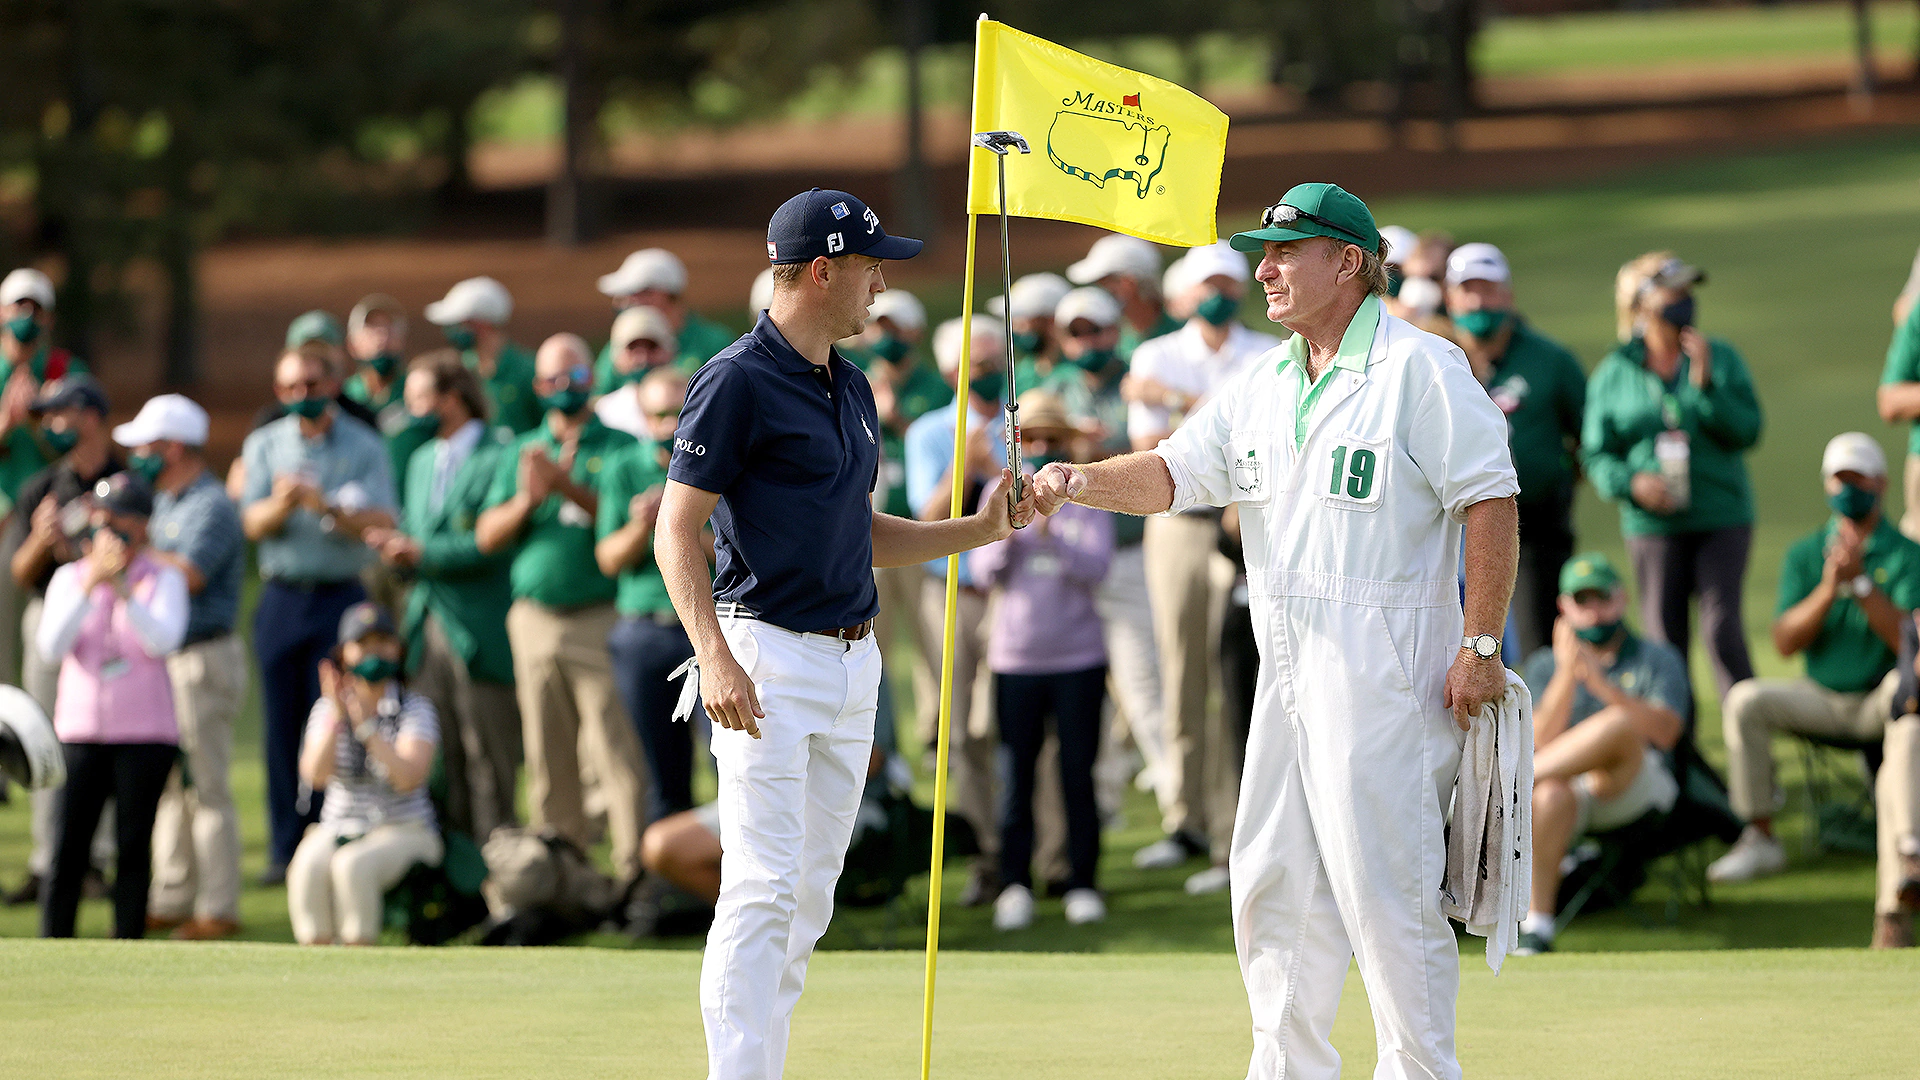 Justin Thomas at 2020 Masters: ‘Very confident I’m going to win around this place’